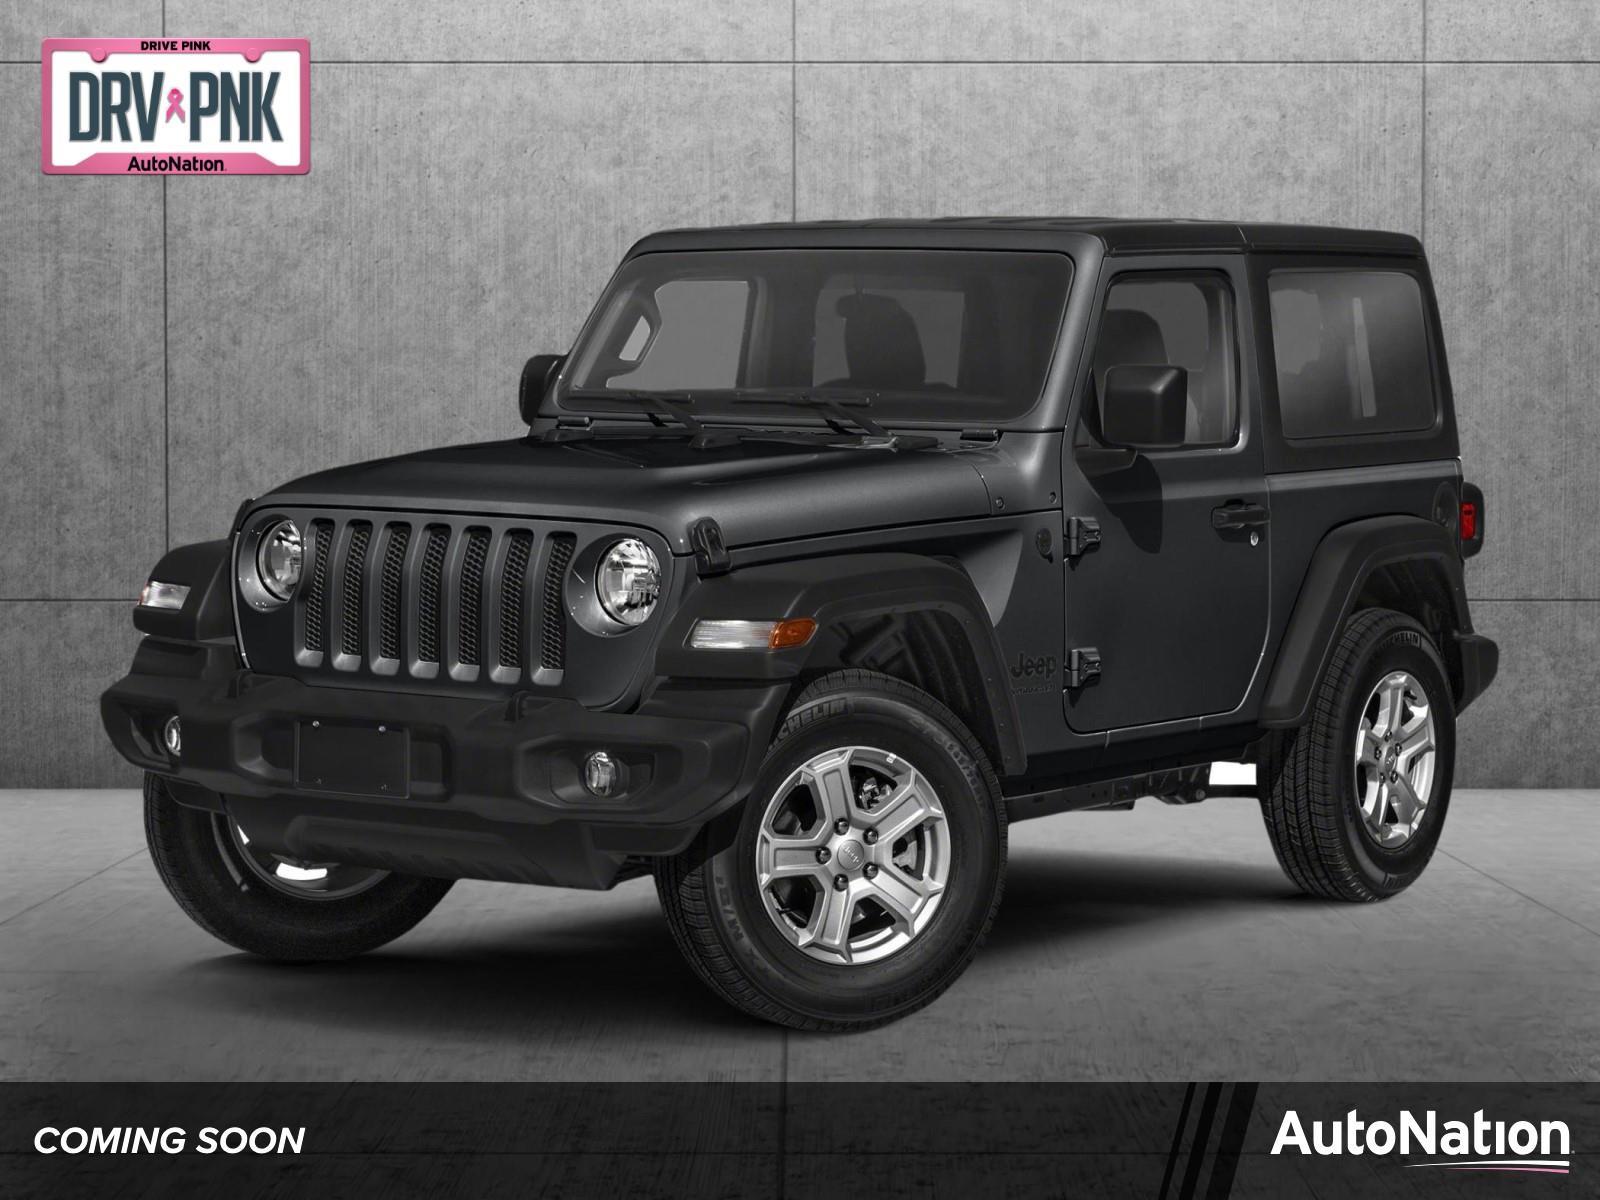 NEW 2023 Jeep Wrangler for sale in Englewood, CO 80112 - AutoNation